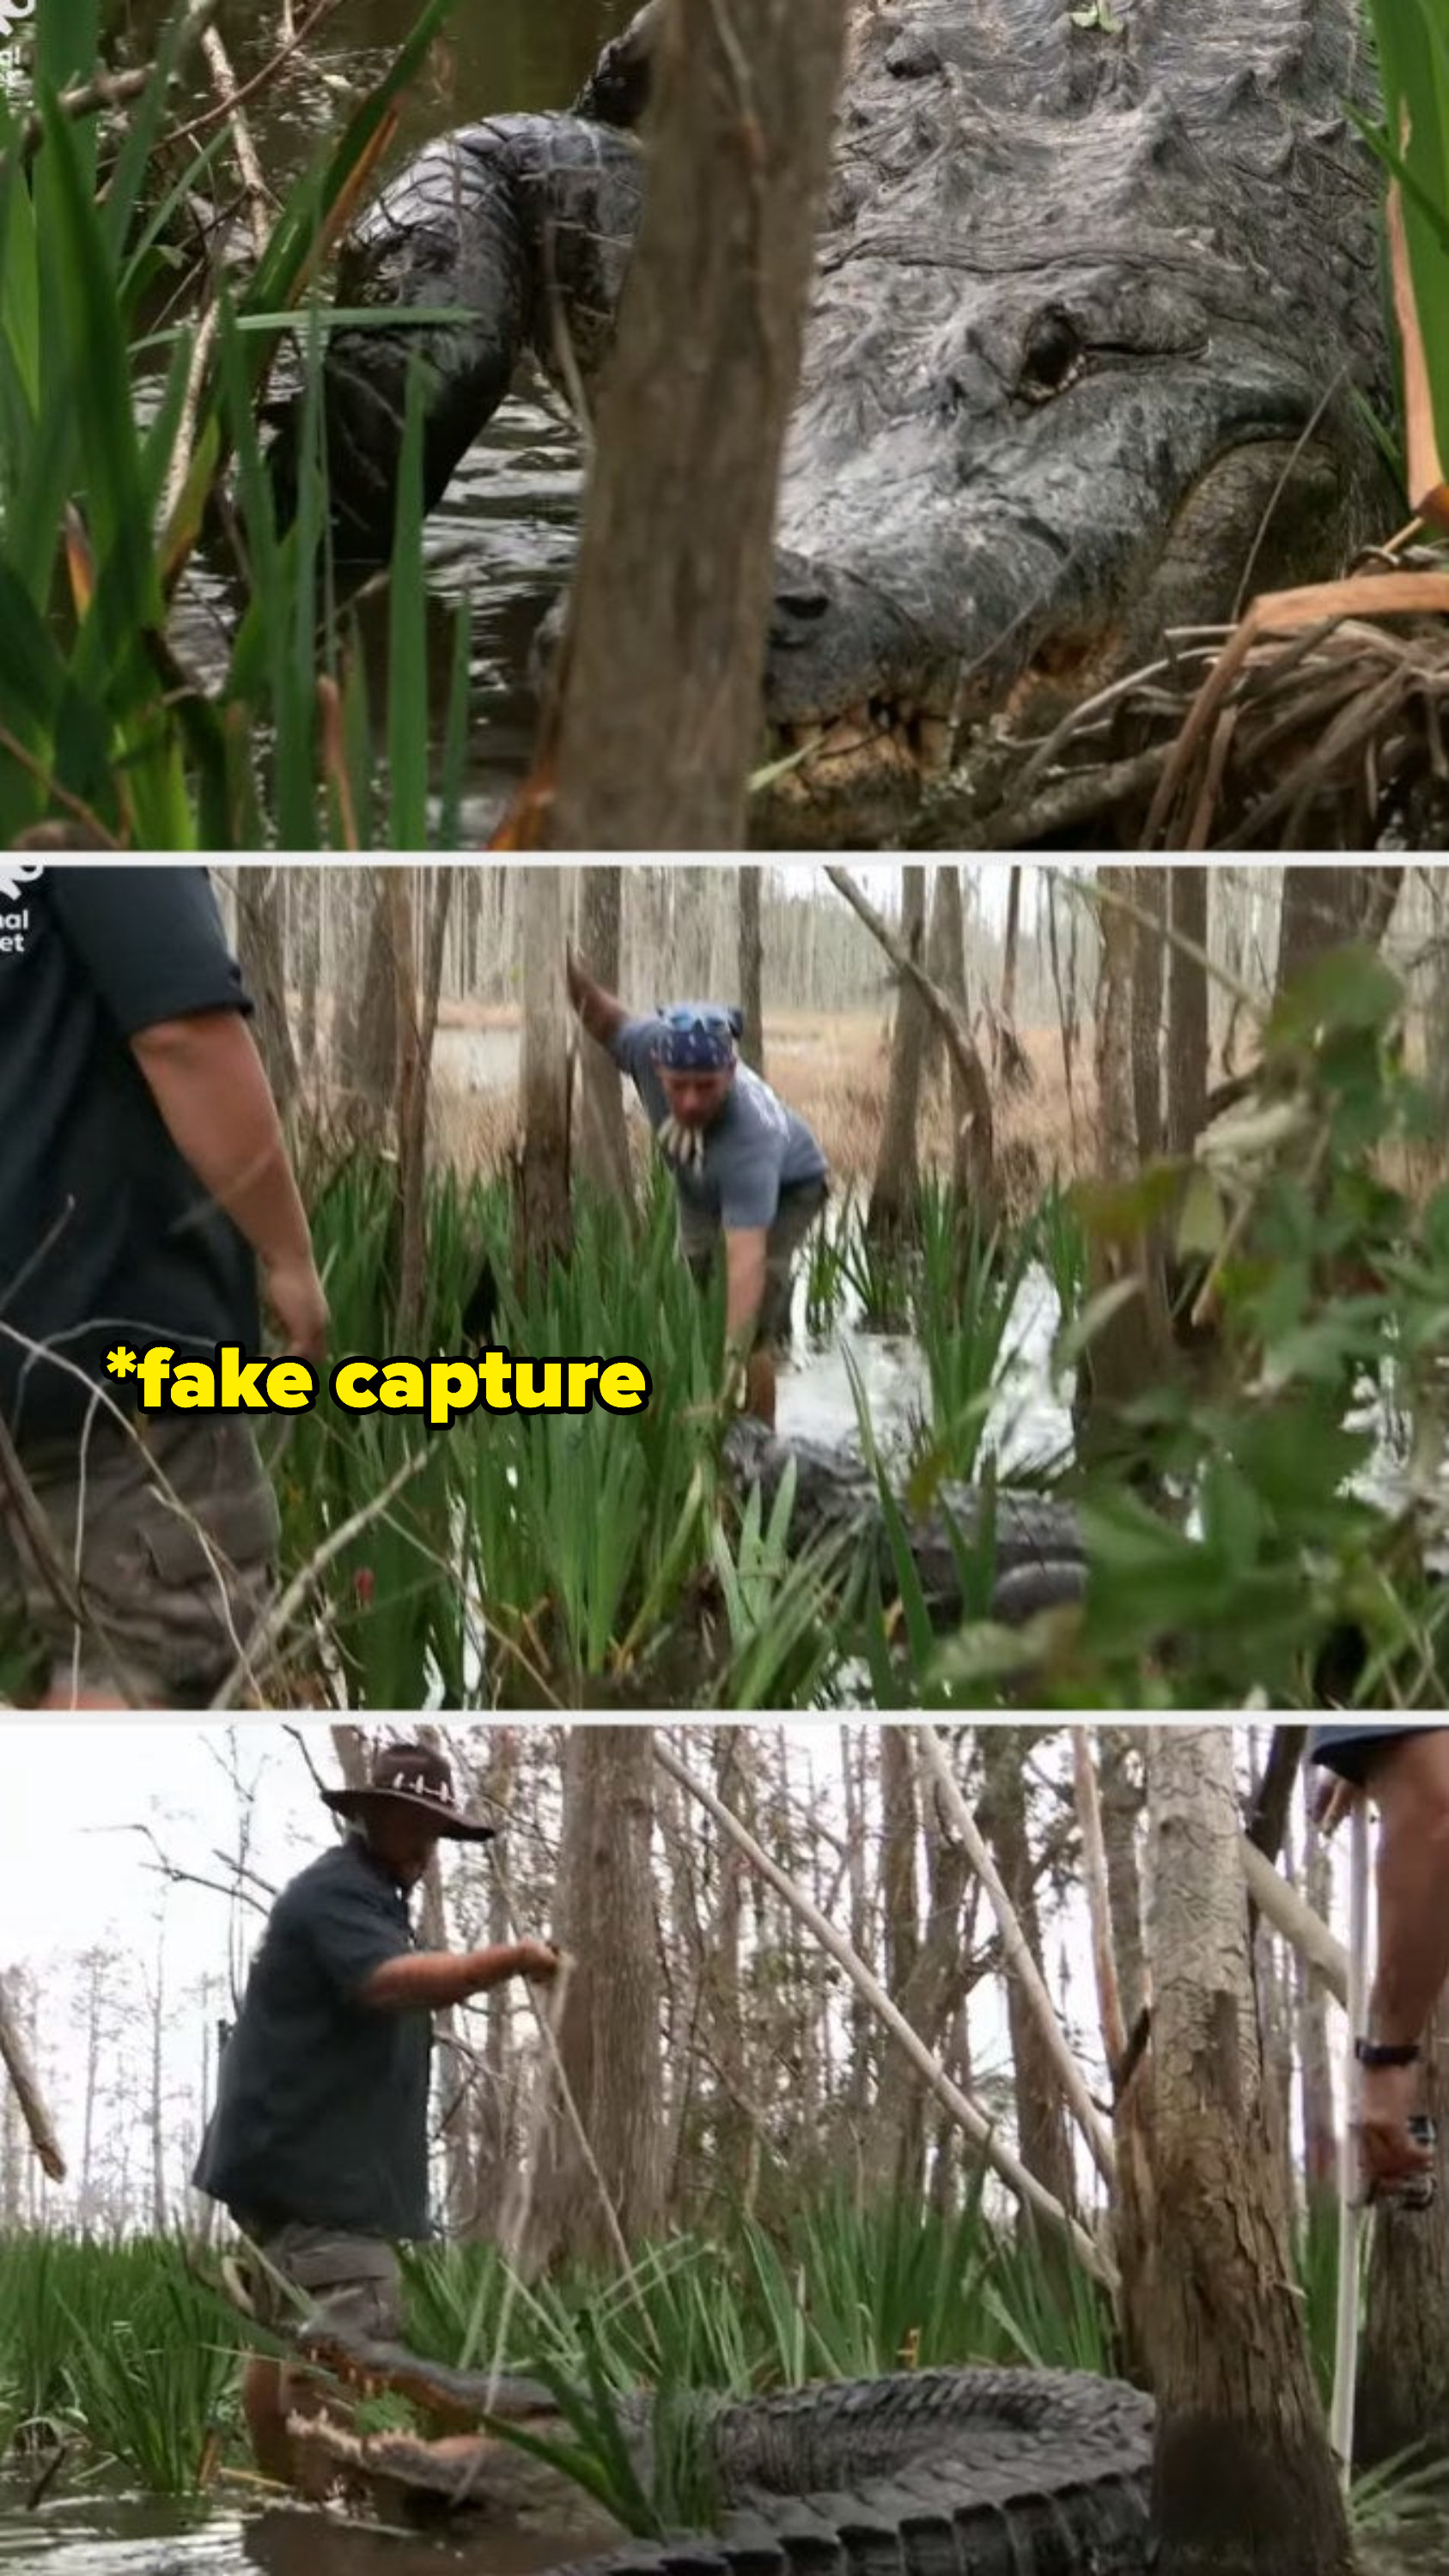 The gator boys capturing a gator in a swamp with the text &quot;fake capture&quot;